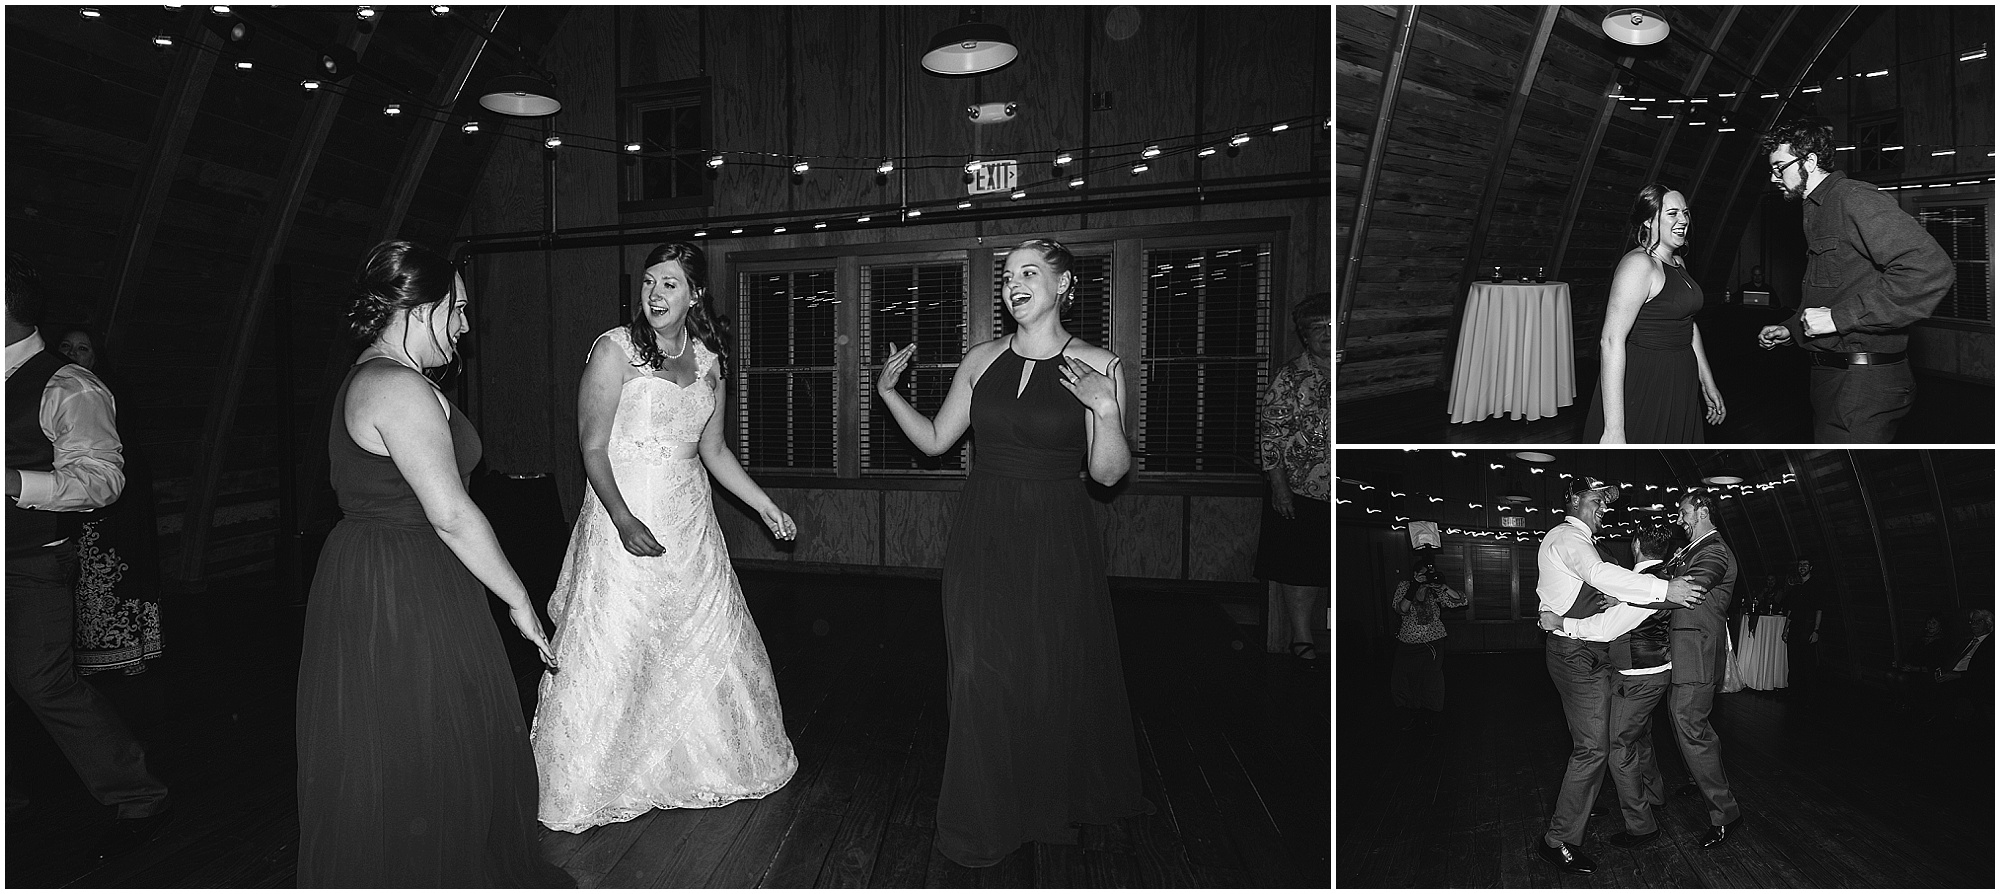 The dance party begins upstairs in the gorgeous hardwood interior of this Hollinshead Barn fall wedding in Bend, OR. | Erica Swantek Photography